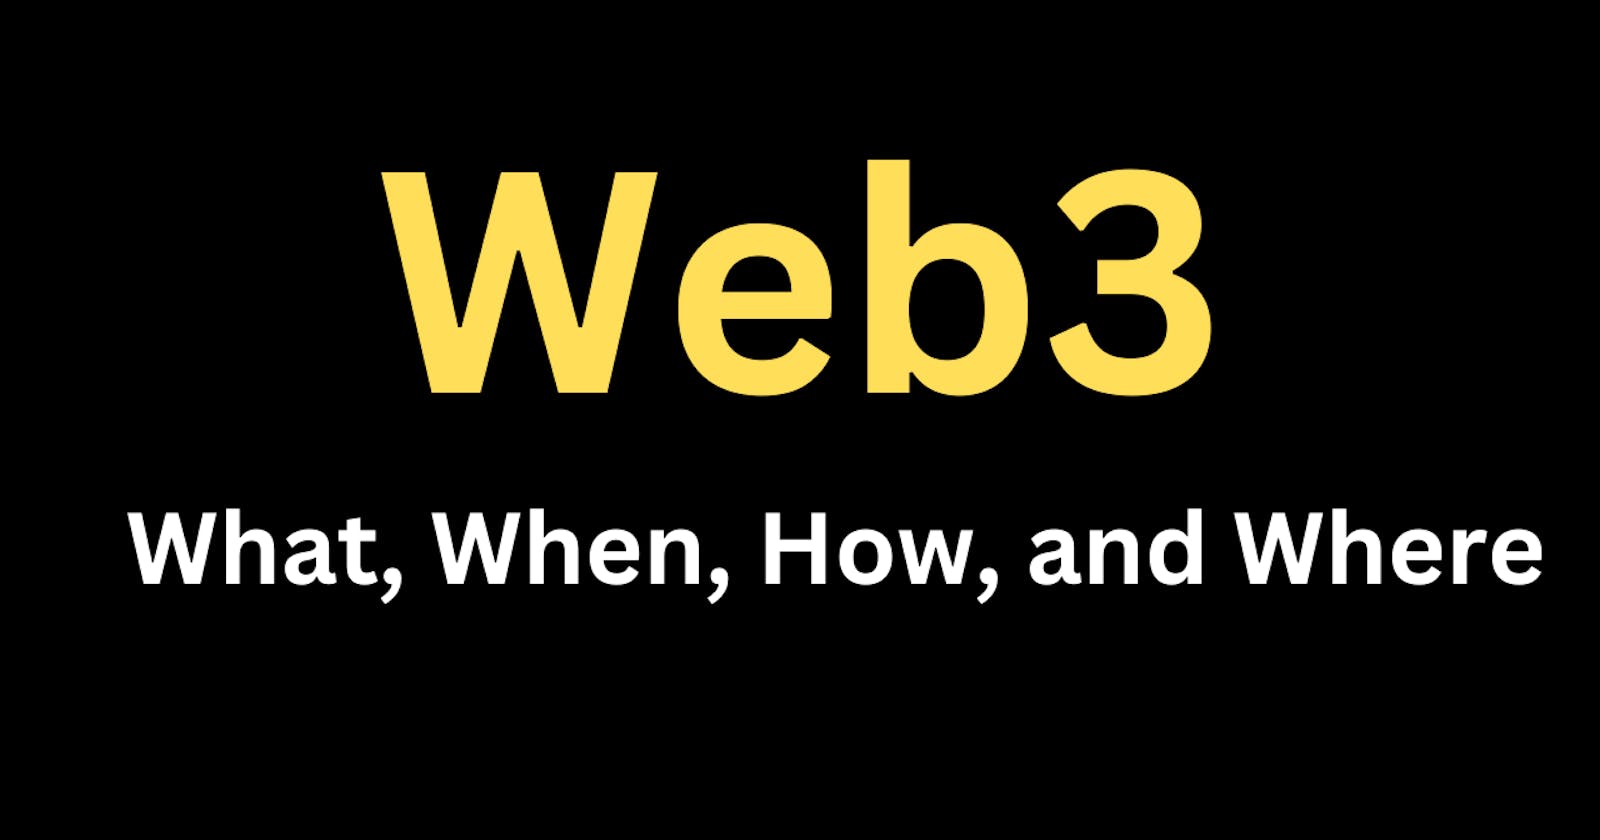 Web3: Exploring What, When, How, and Where